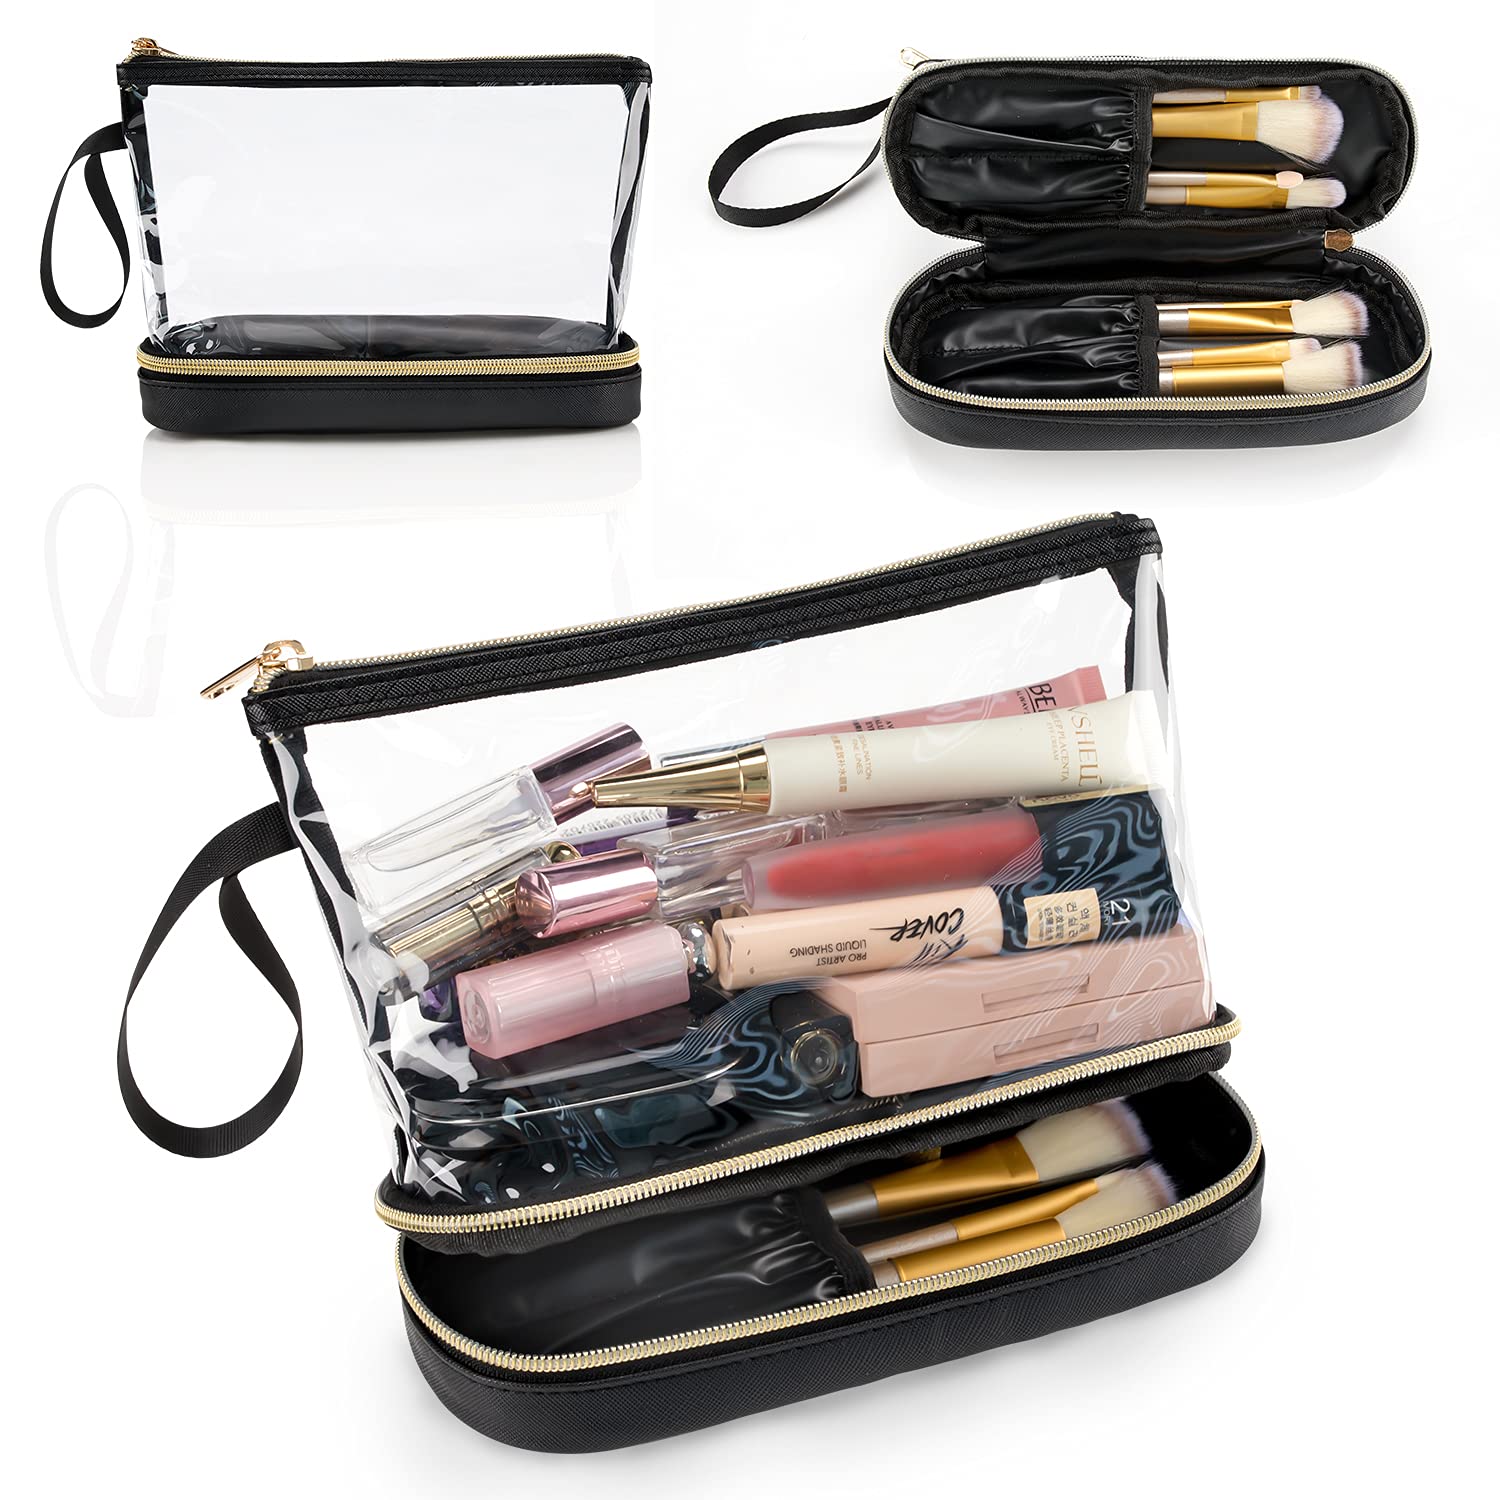 Cosmetic & Makeup Bag, Zippered Makeup Pouch for Women & Girls, Travel Cute  Organizer Suitable for Purse, Versatile Bag with Multiple Compartments for  Makeup, Toiletries, Pencils, Accessories : Amazon.in: Beauty